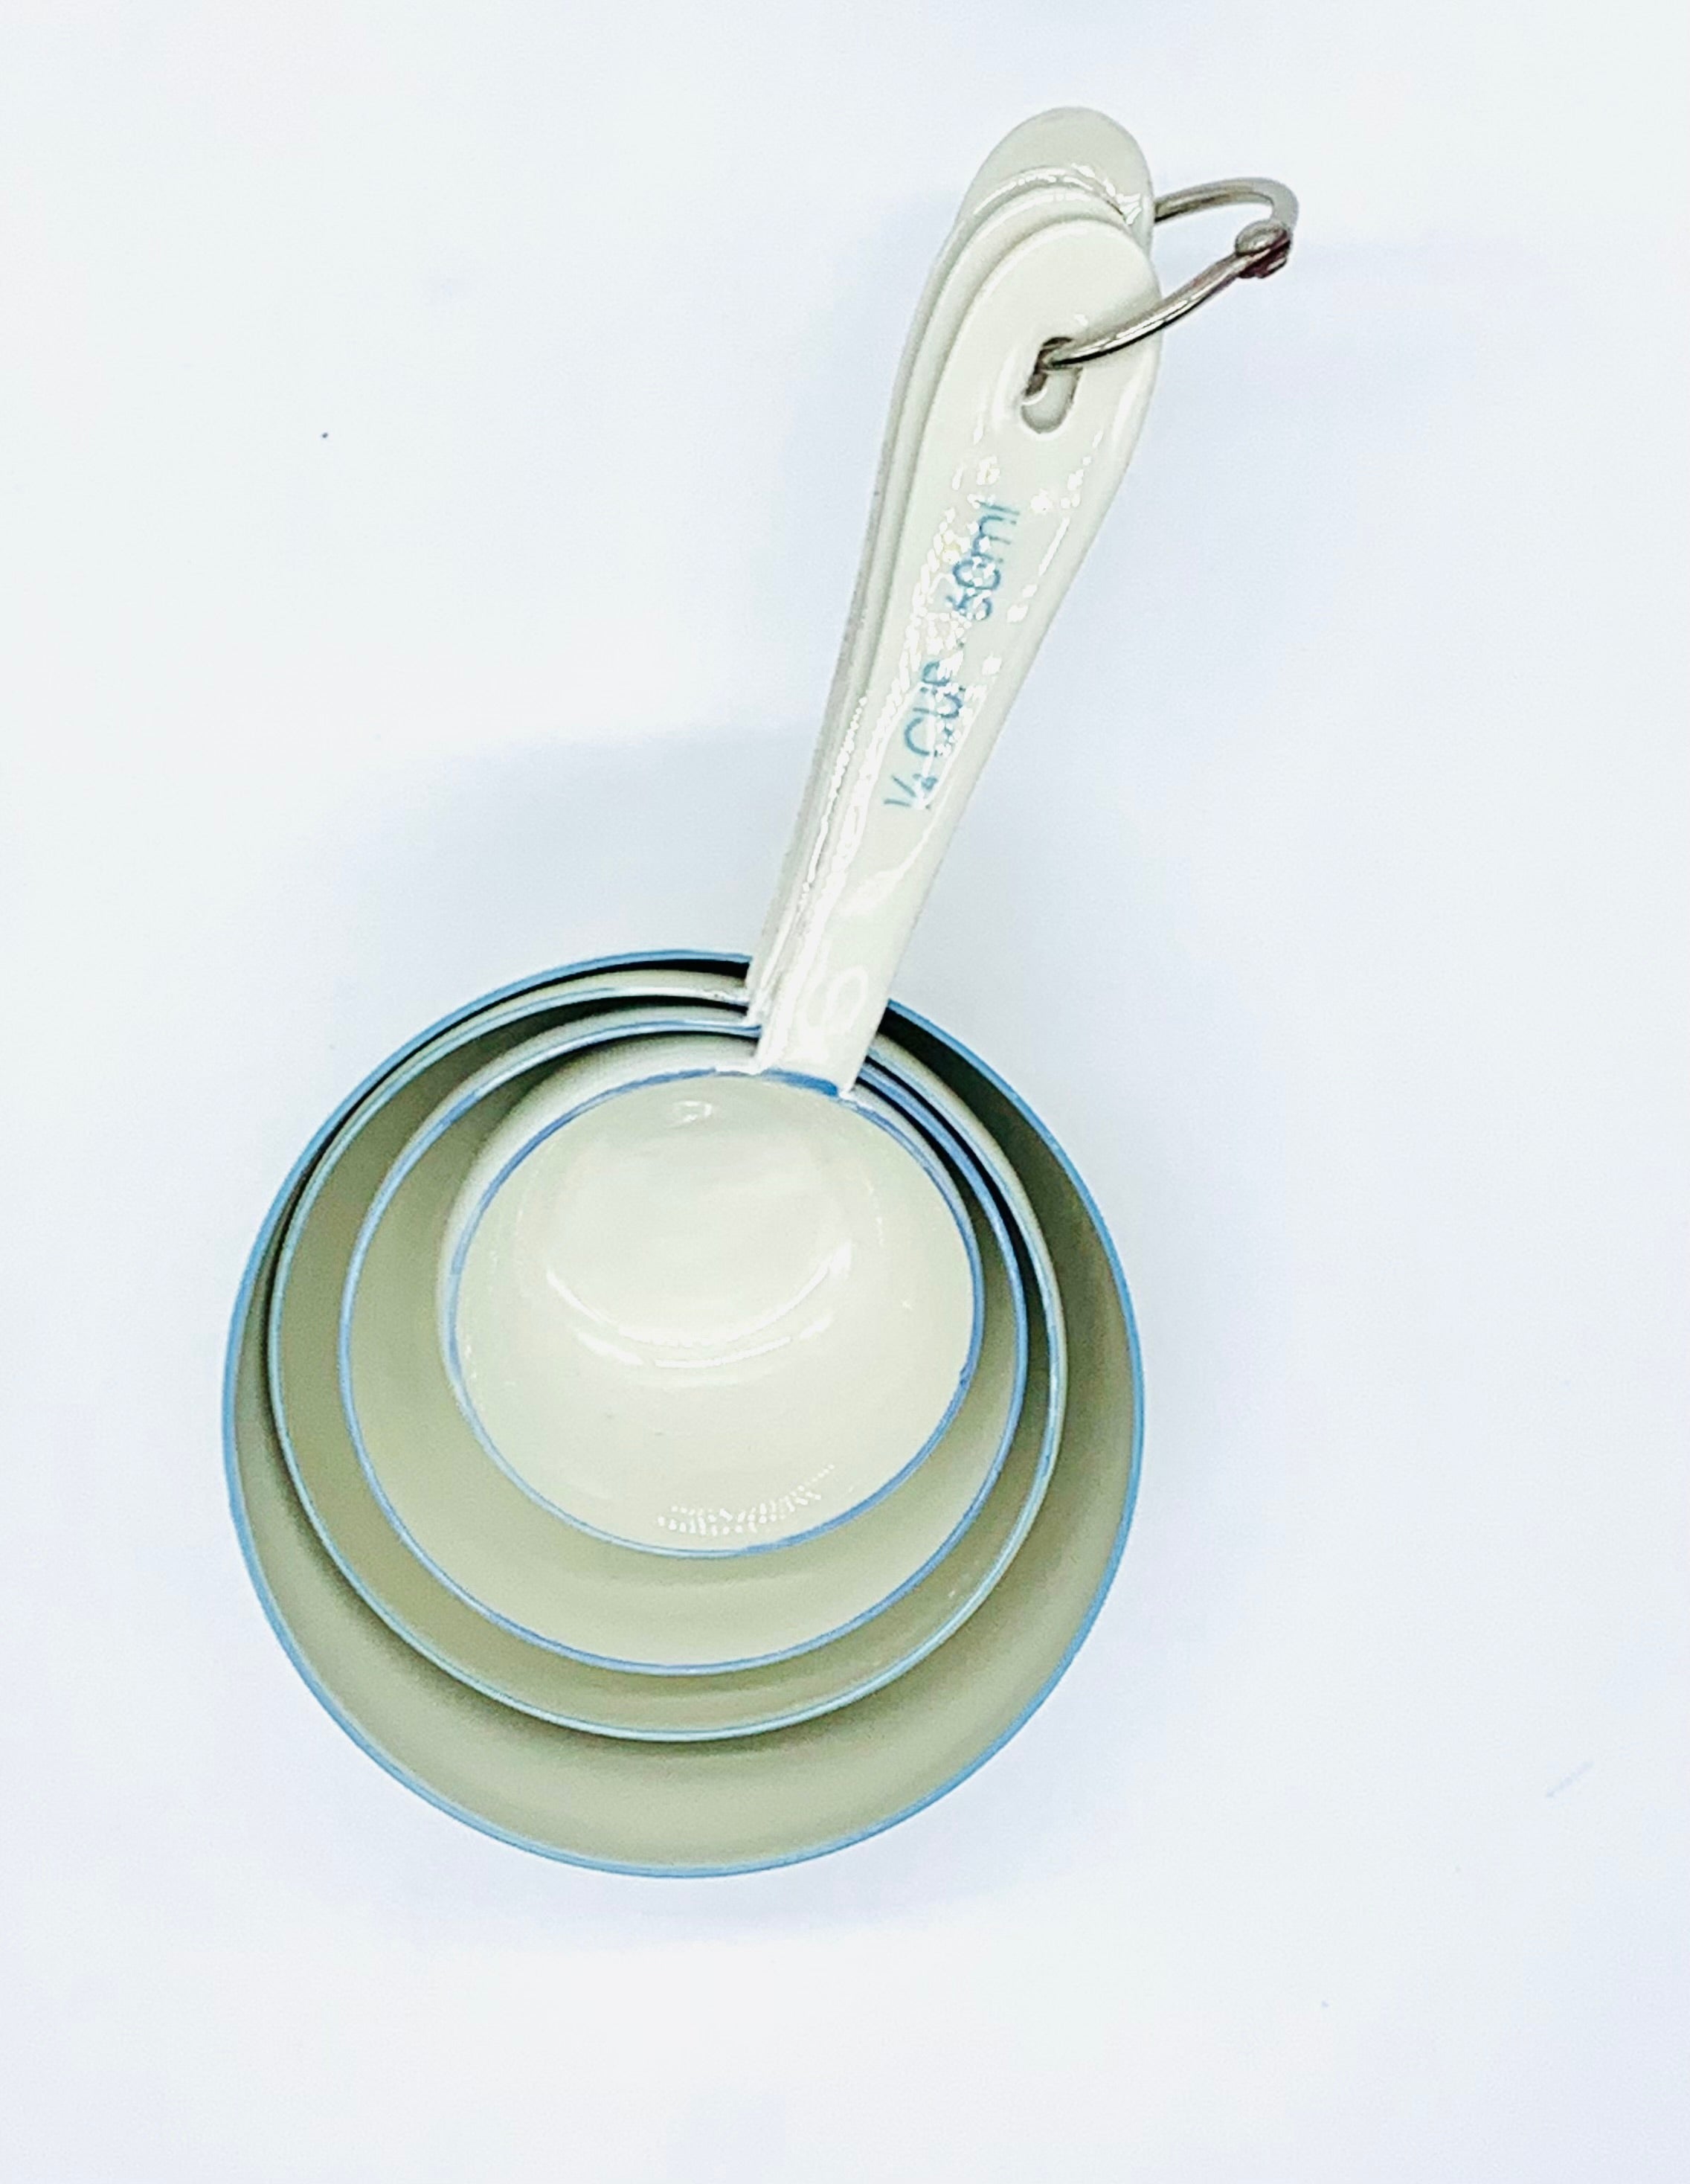 Measuring Cup Set of Four - White/Light Blue